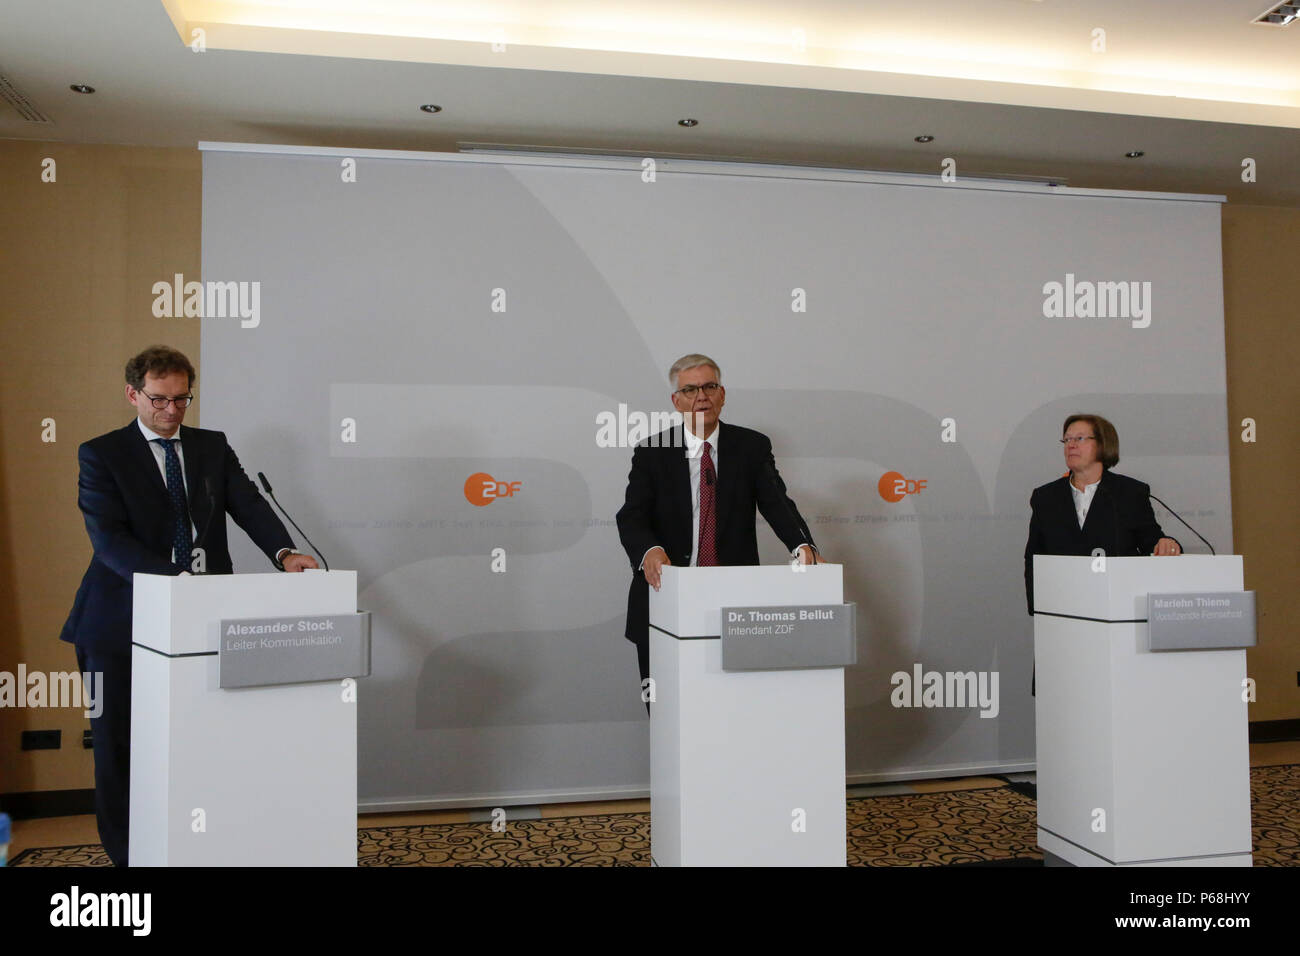 Mainz, Germany. 29th June 2018. Alexander Stock, the head of the communication's department of the ZDF. Thomas Bellut, the director general (Intendant) of the ZDF, and Marlehn Thieme, the chairwoman of the ZDF Television Board (ZDF-Fernsehrat), are pictured from left to right at the press-conference. The Television Board of the German public-service television broadcaster ZDF (Zweites Deutsches Fernsehen) met for their 9. meeting of its XV. term of office in Mainz. The chairwoman of the Television Board Marlehn Thieme was re-elected to her position in the scheduled midterm election of the 3 se Stock Photo